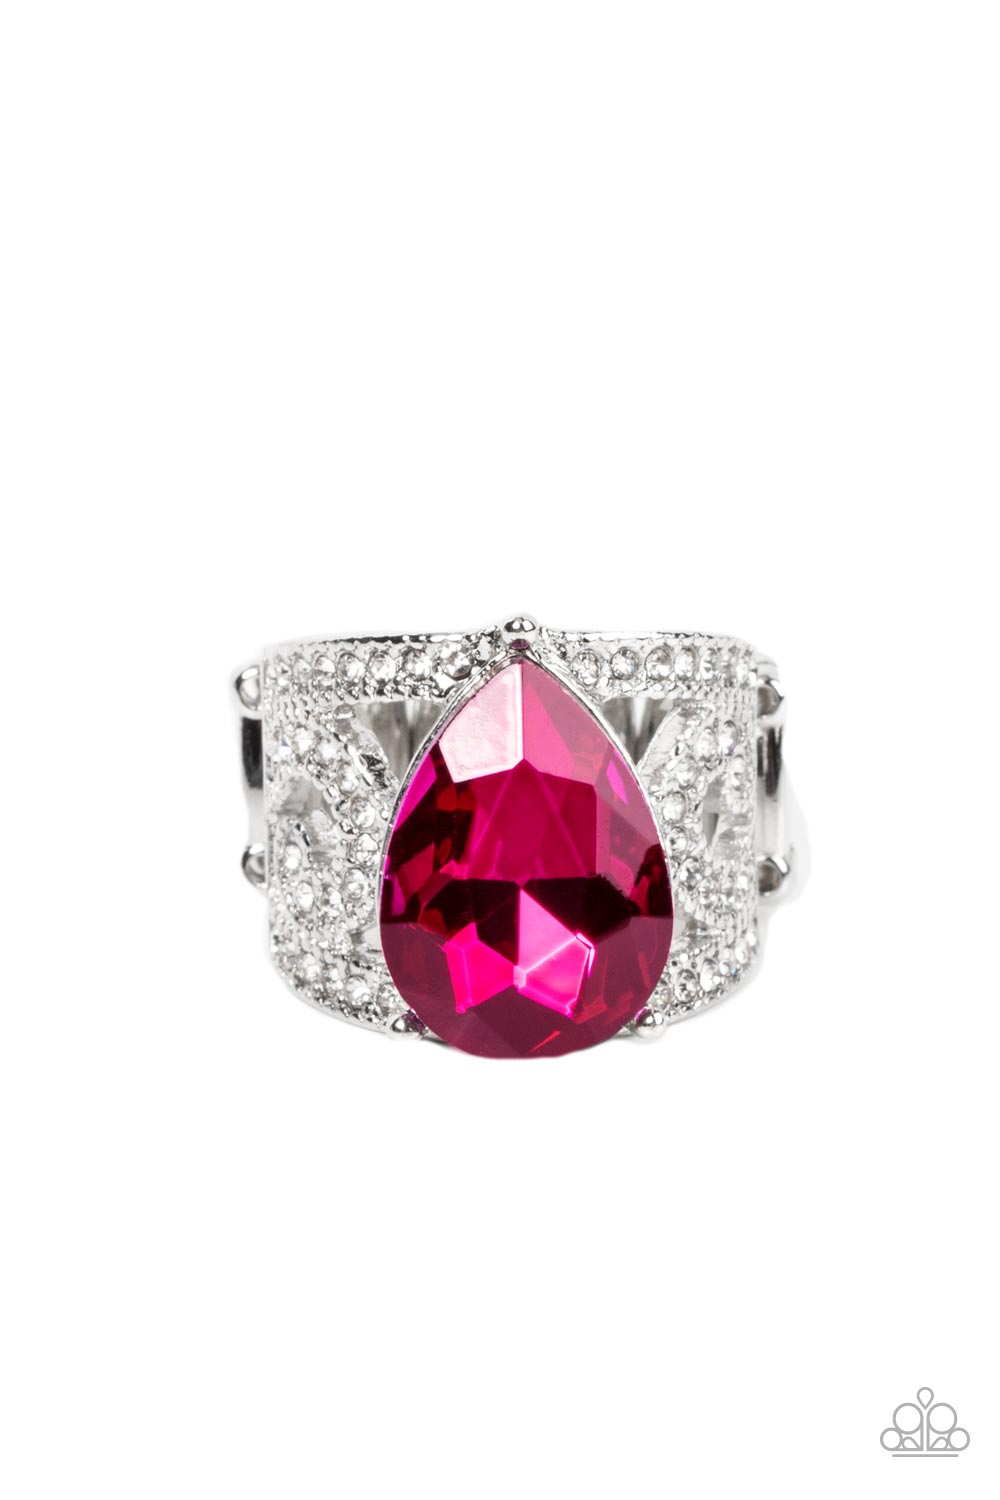 Kinda a Big Deal - Pink Gem and Silver Ring - Paparazzi Accessories - An oversized pink teardrop gem embellishes the center of a regal filigree filled band dotted in glassy white rhinestones, invoking a royal radiance atop the finger. Features a stretchy band for a flexible fit. Sold as one individual ring.